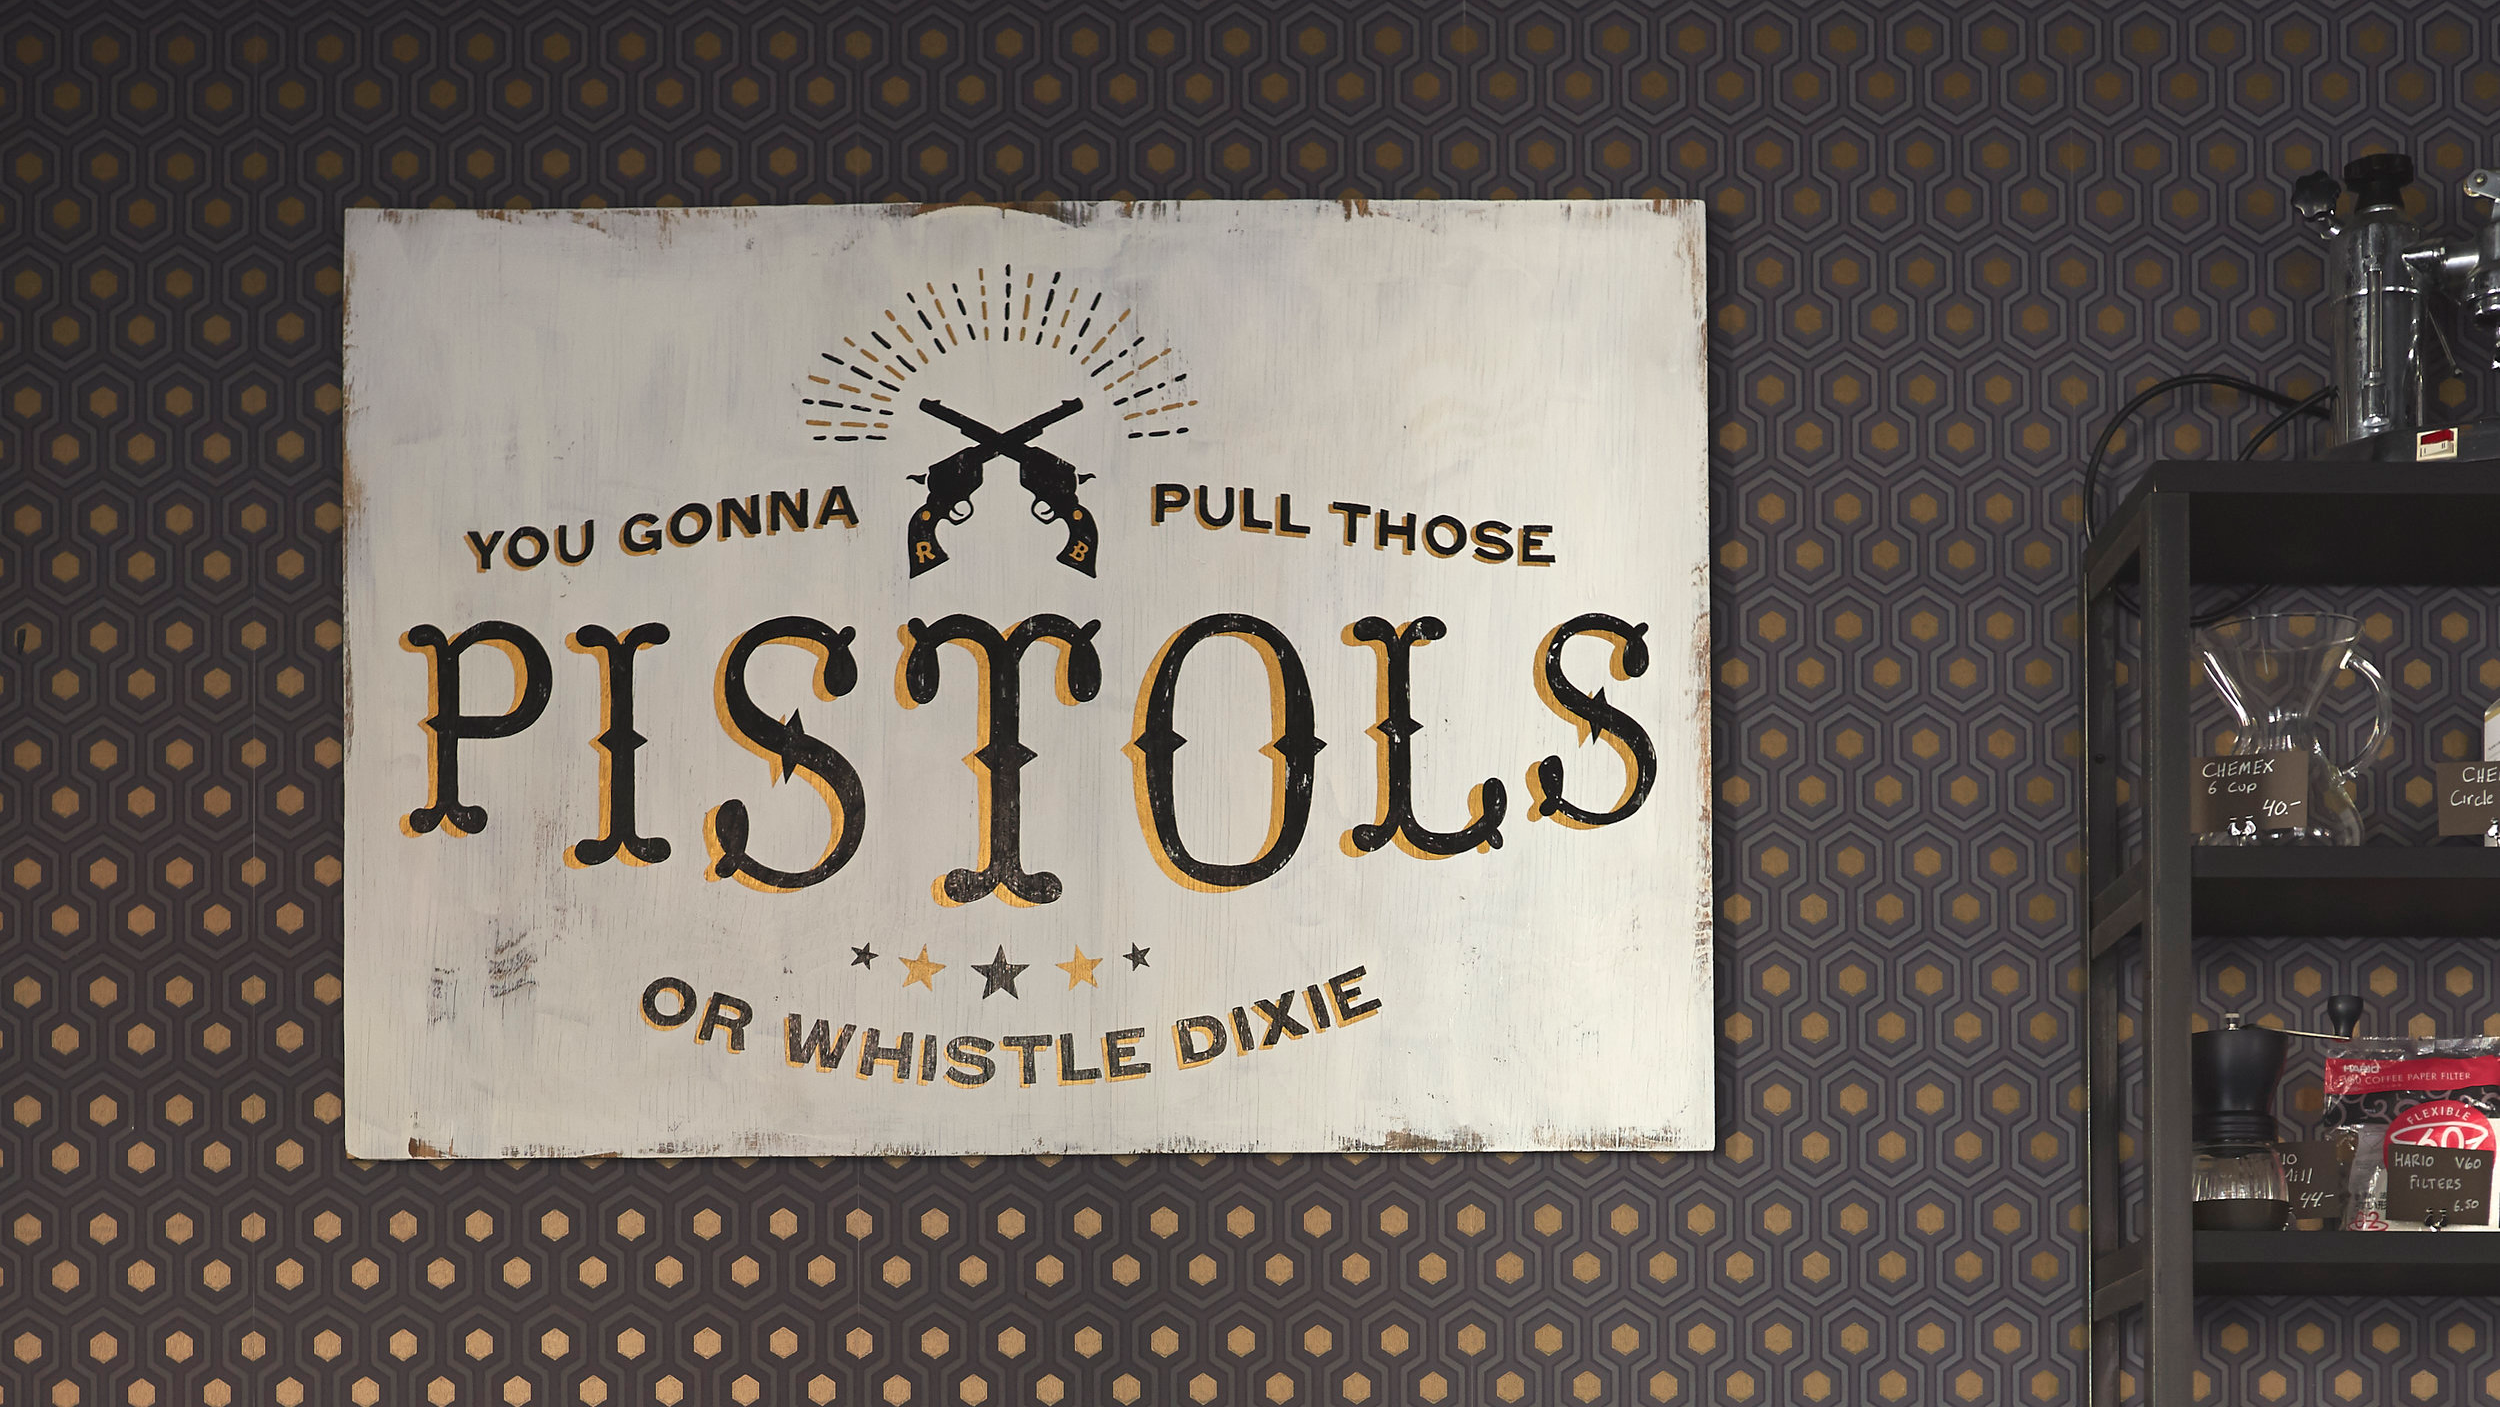 'You gonna pull those Pistols or Whistle Dixie' banner